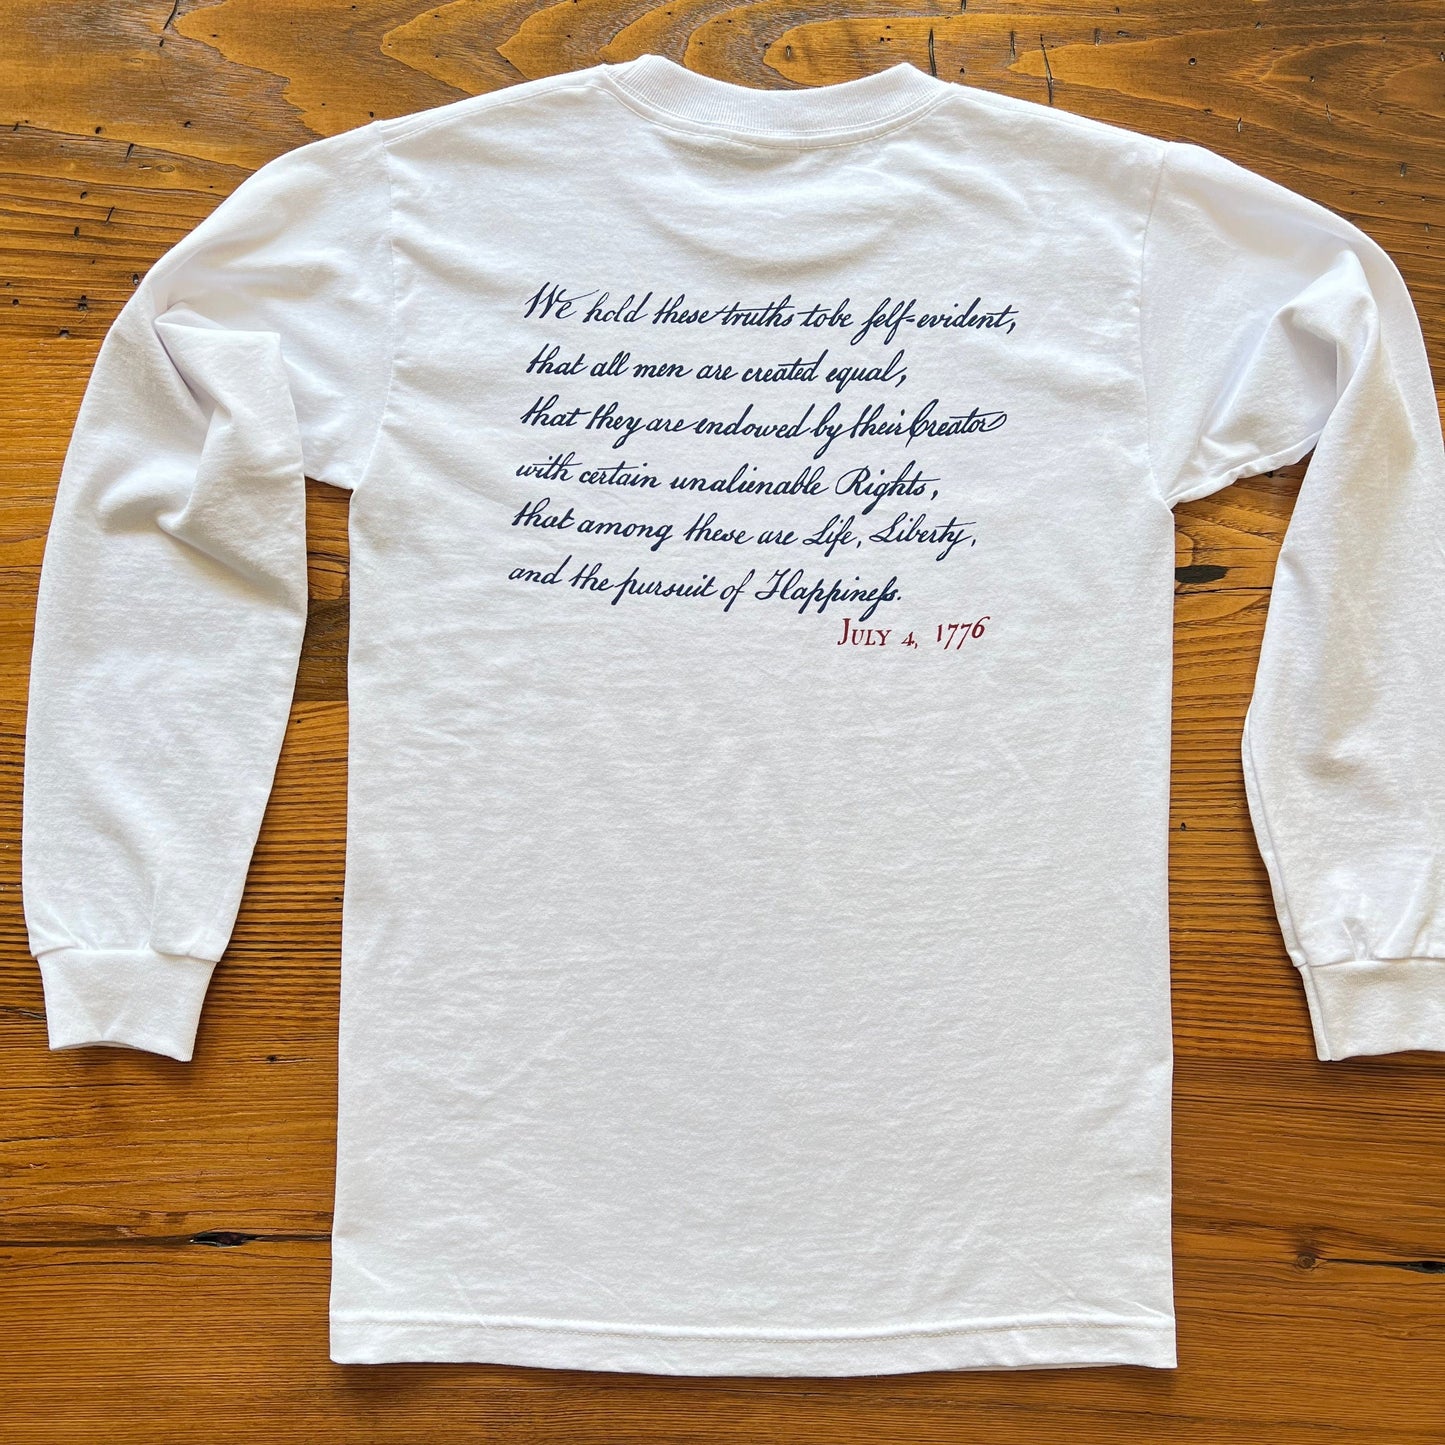 Back of white "We hold these truths - July 4, 1776” Long-sleeved shirt from the history list store